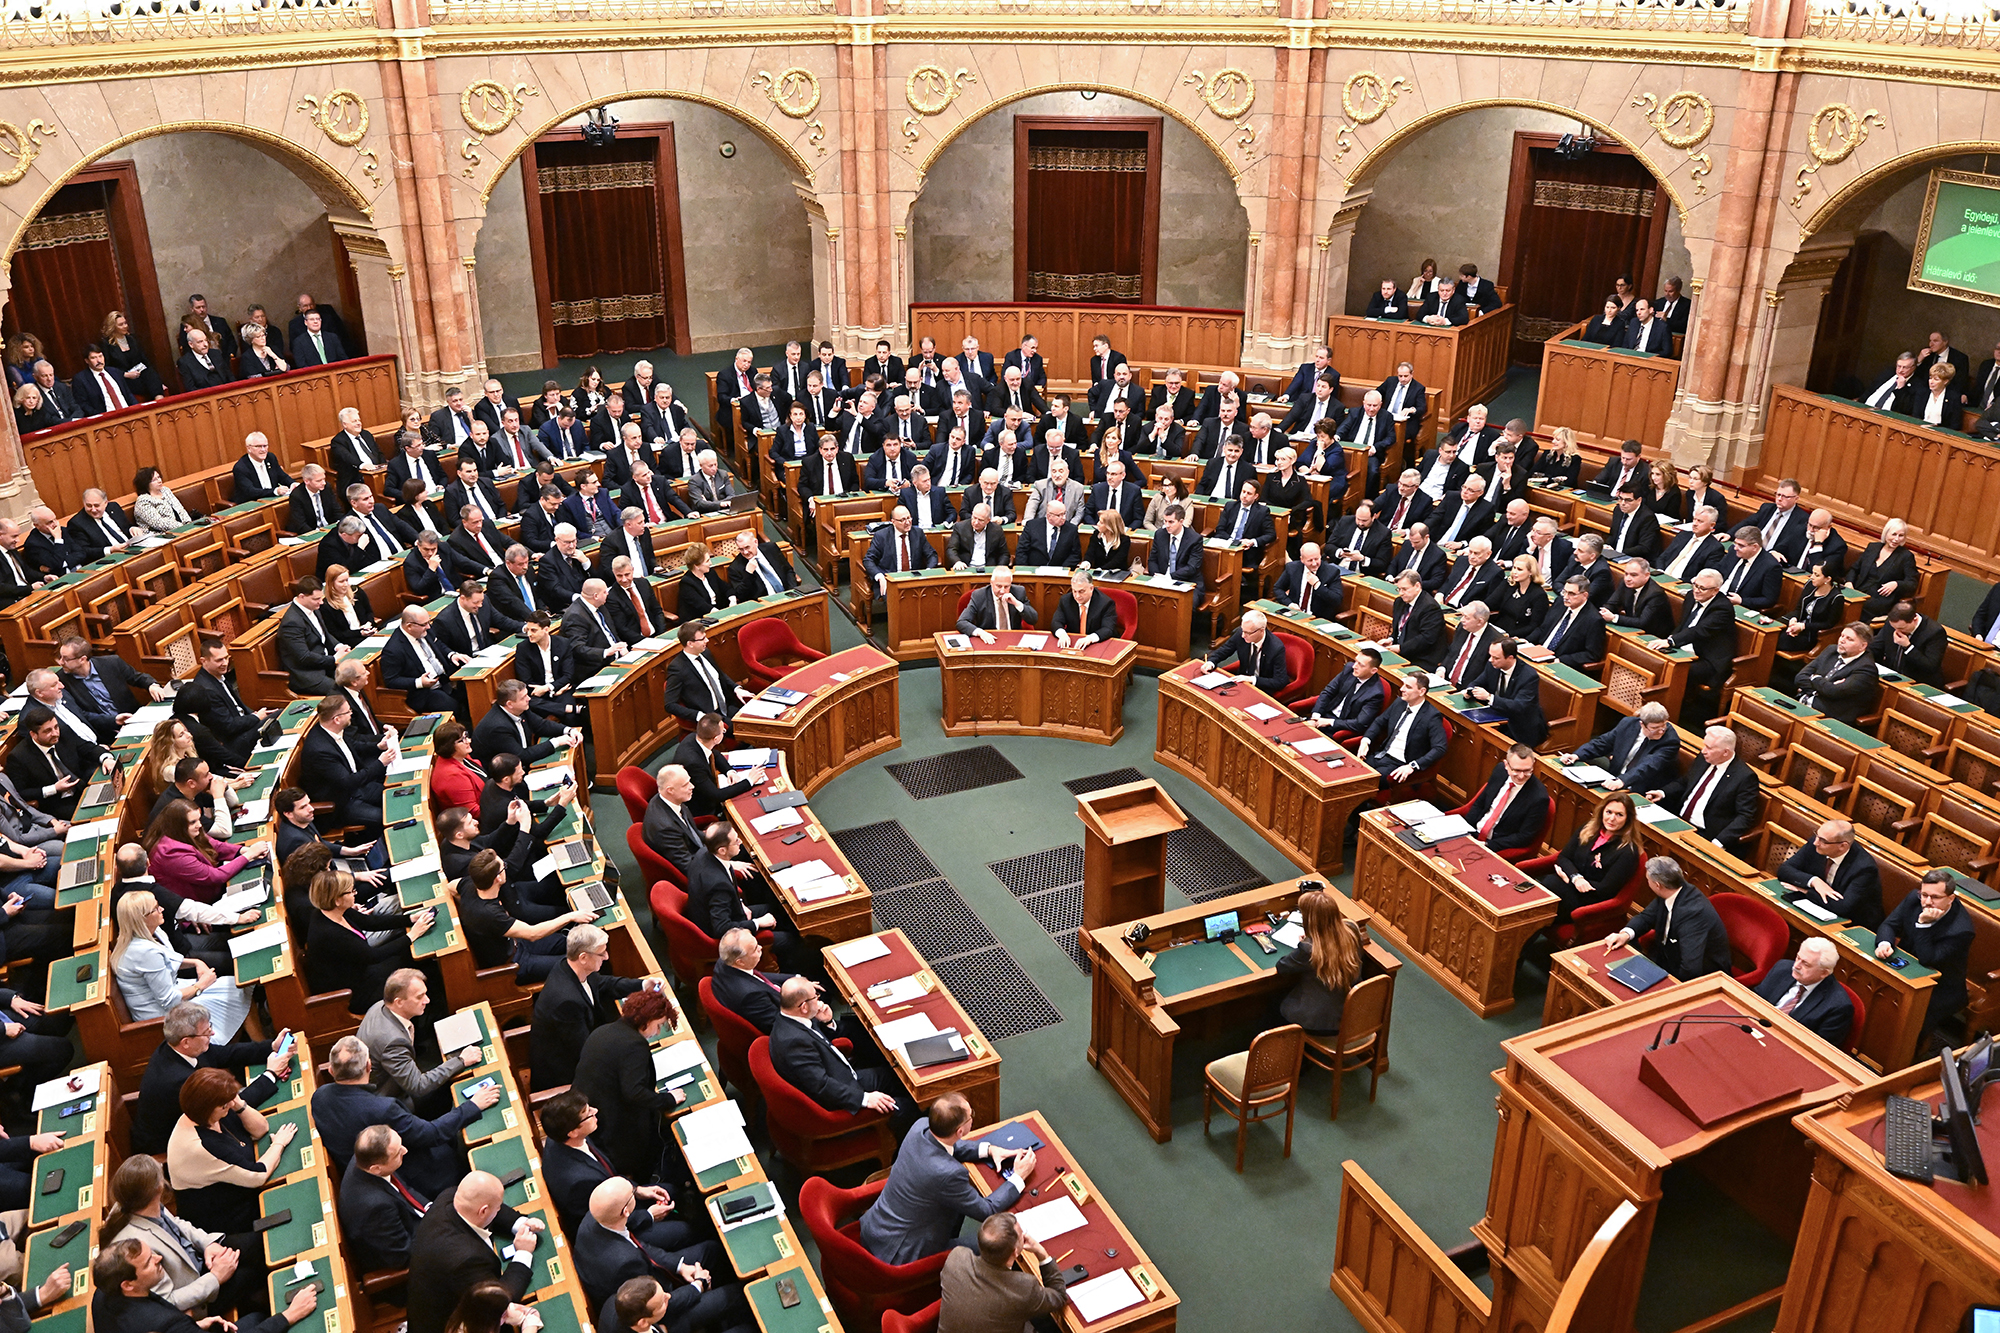 A view of the Hungarian Parliament as representatives vote on the ratification of Sweden's NATO membership in the main hall of the parliament building in Budapest, Hungary, on February 26.